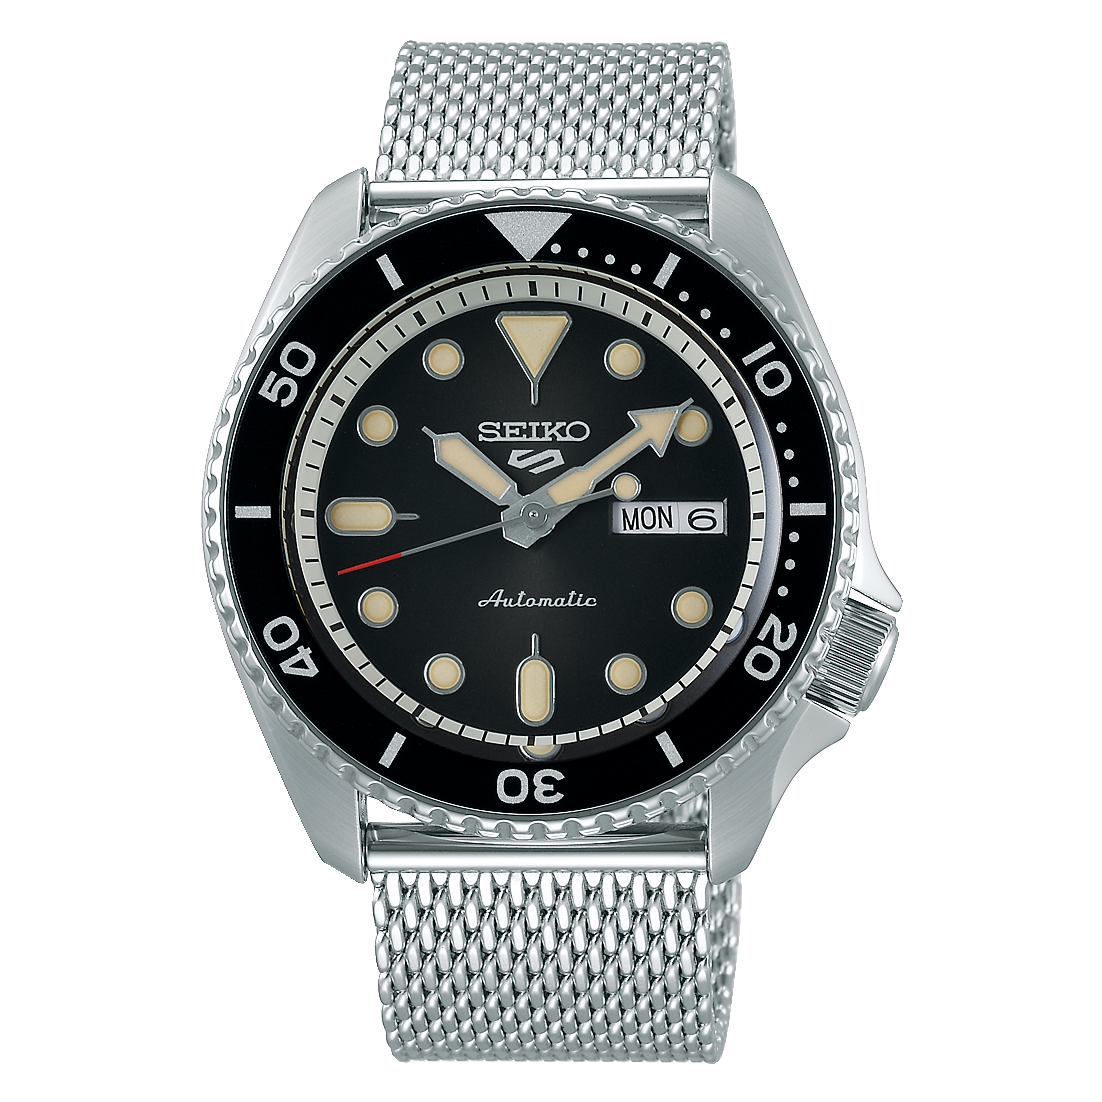 Seiko 5 Sport - Suits Series With Black Dial